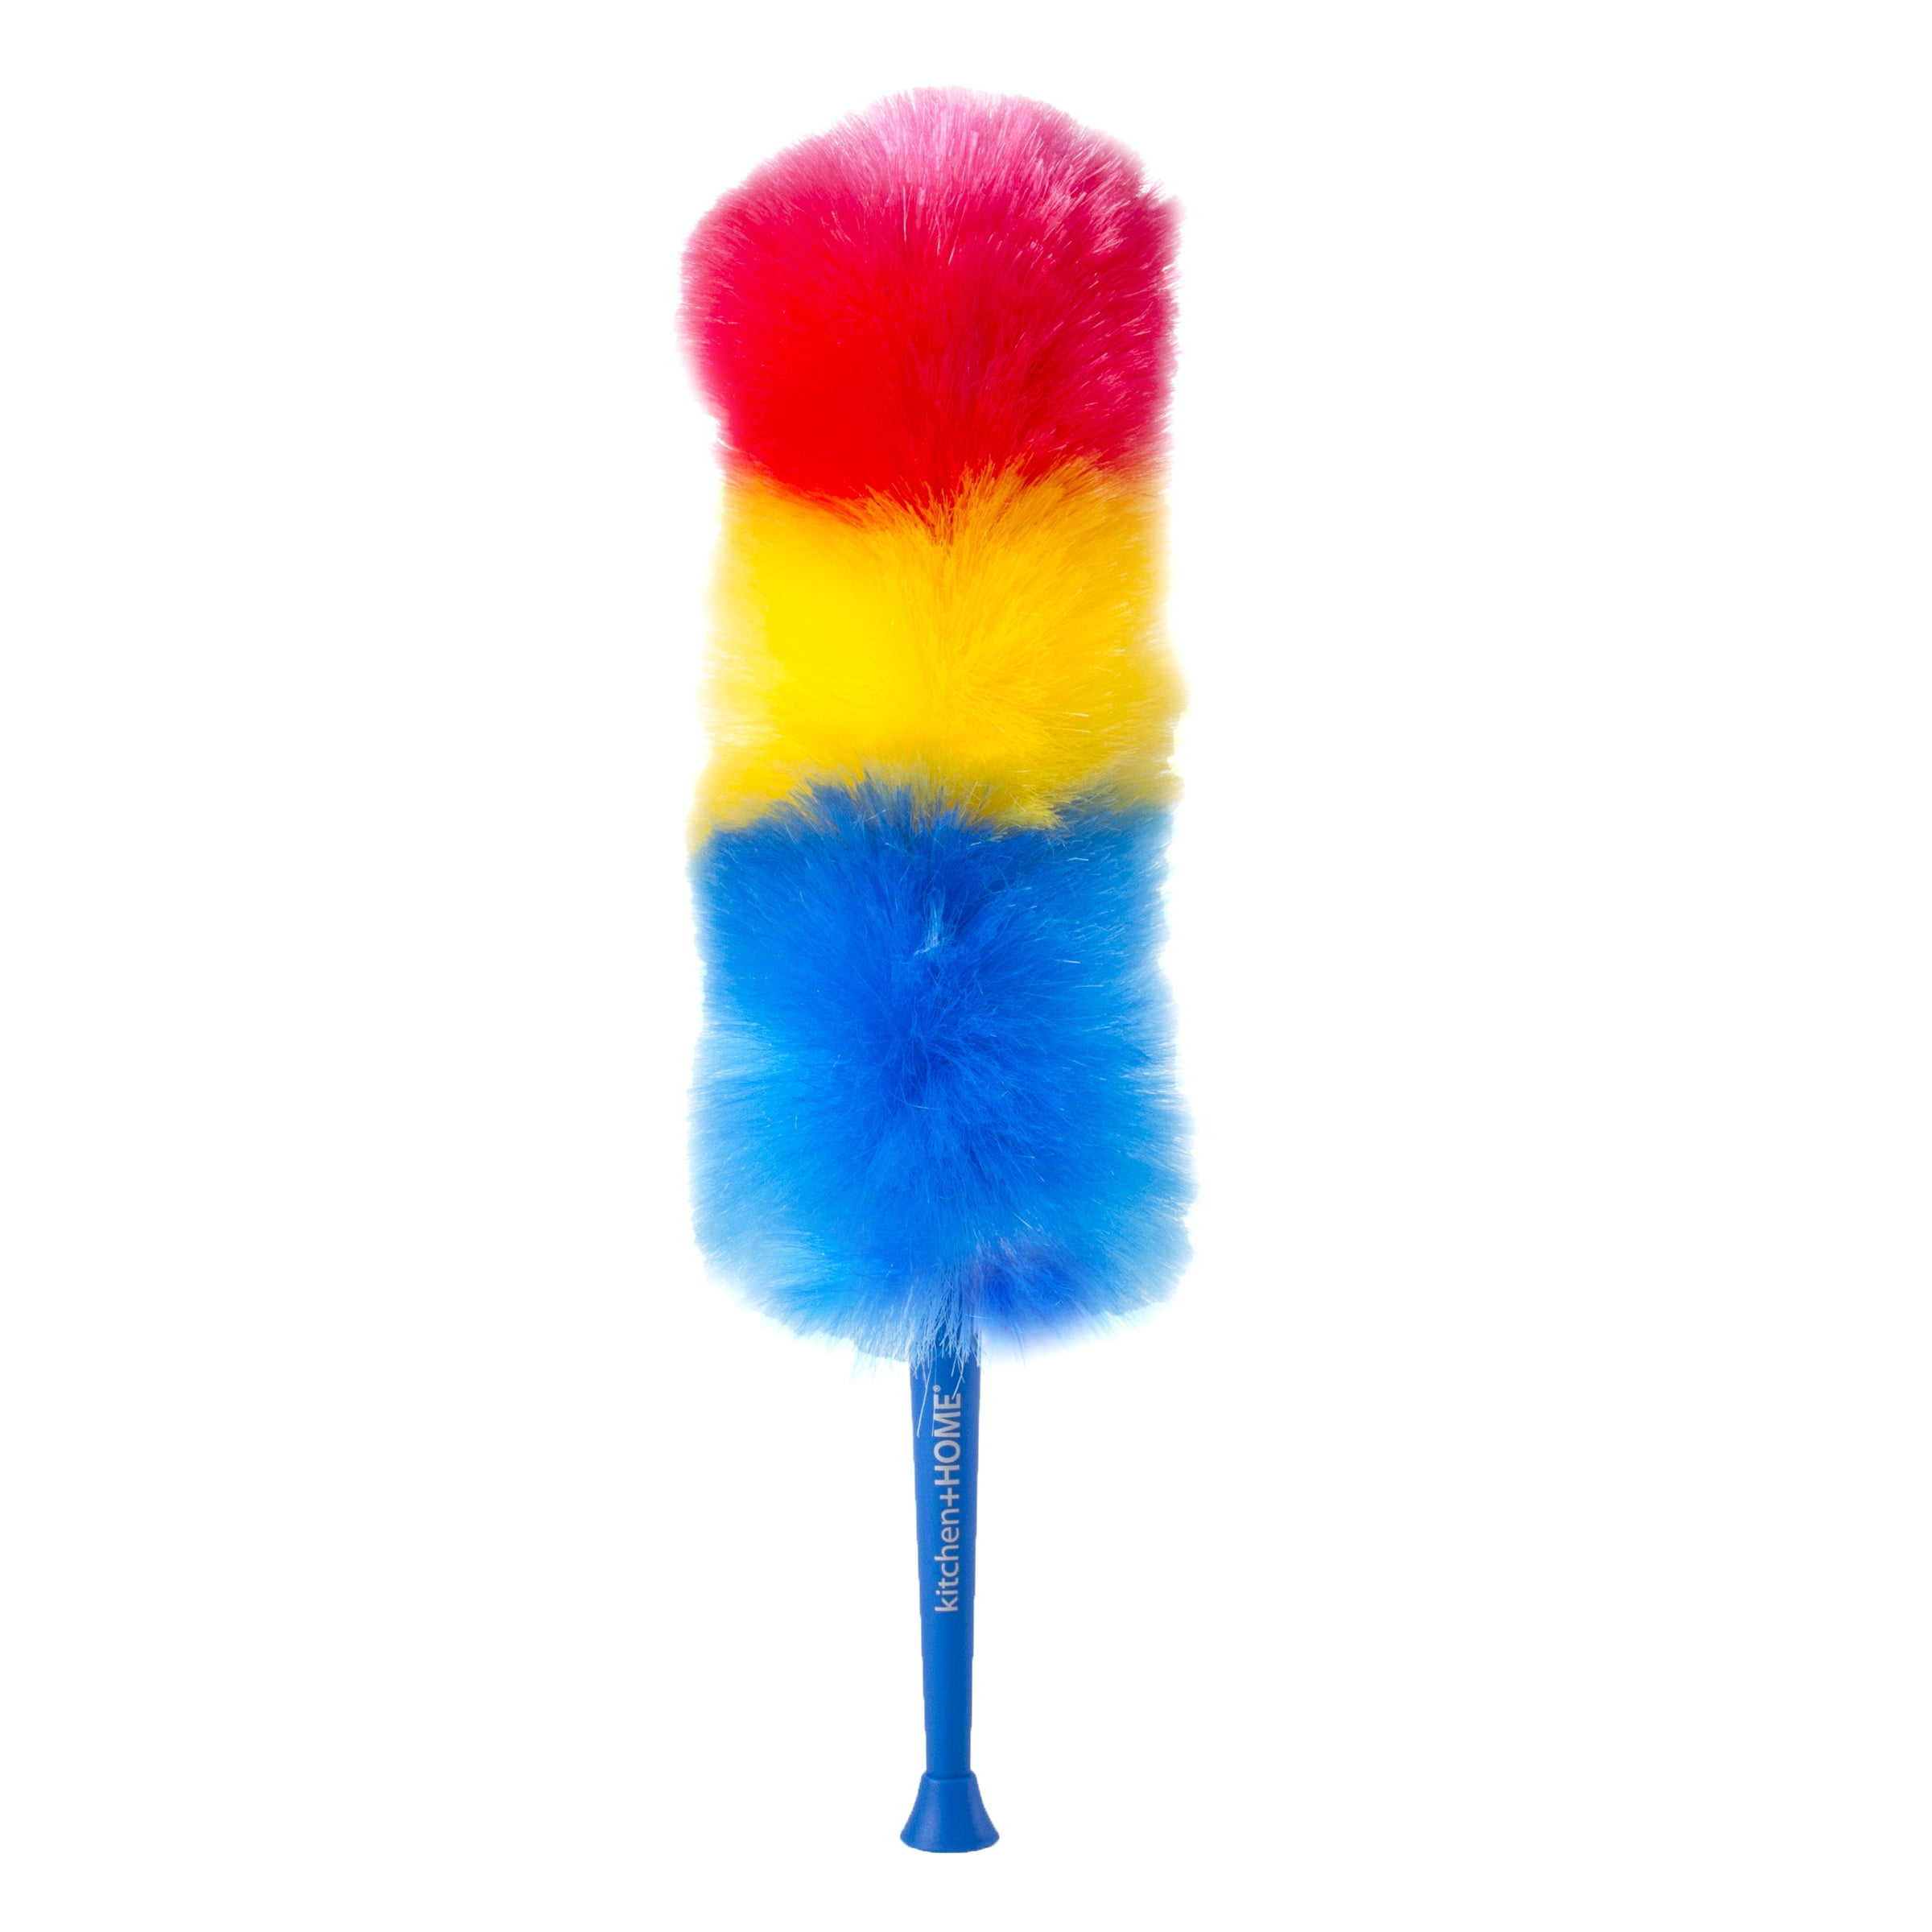 One lambswool duster plastic handle 90cm overall top quality export lambswool 